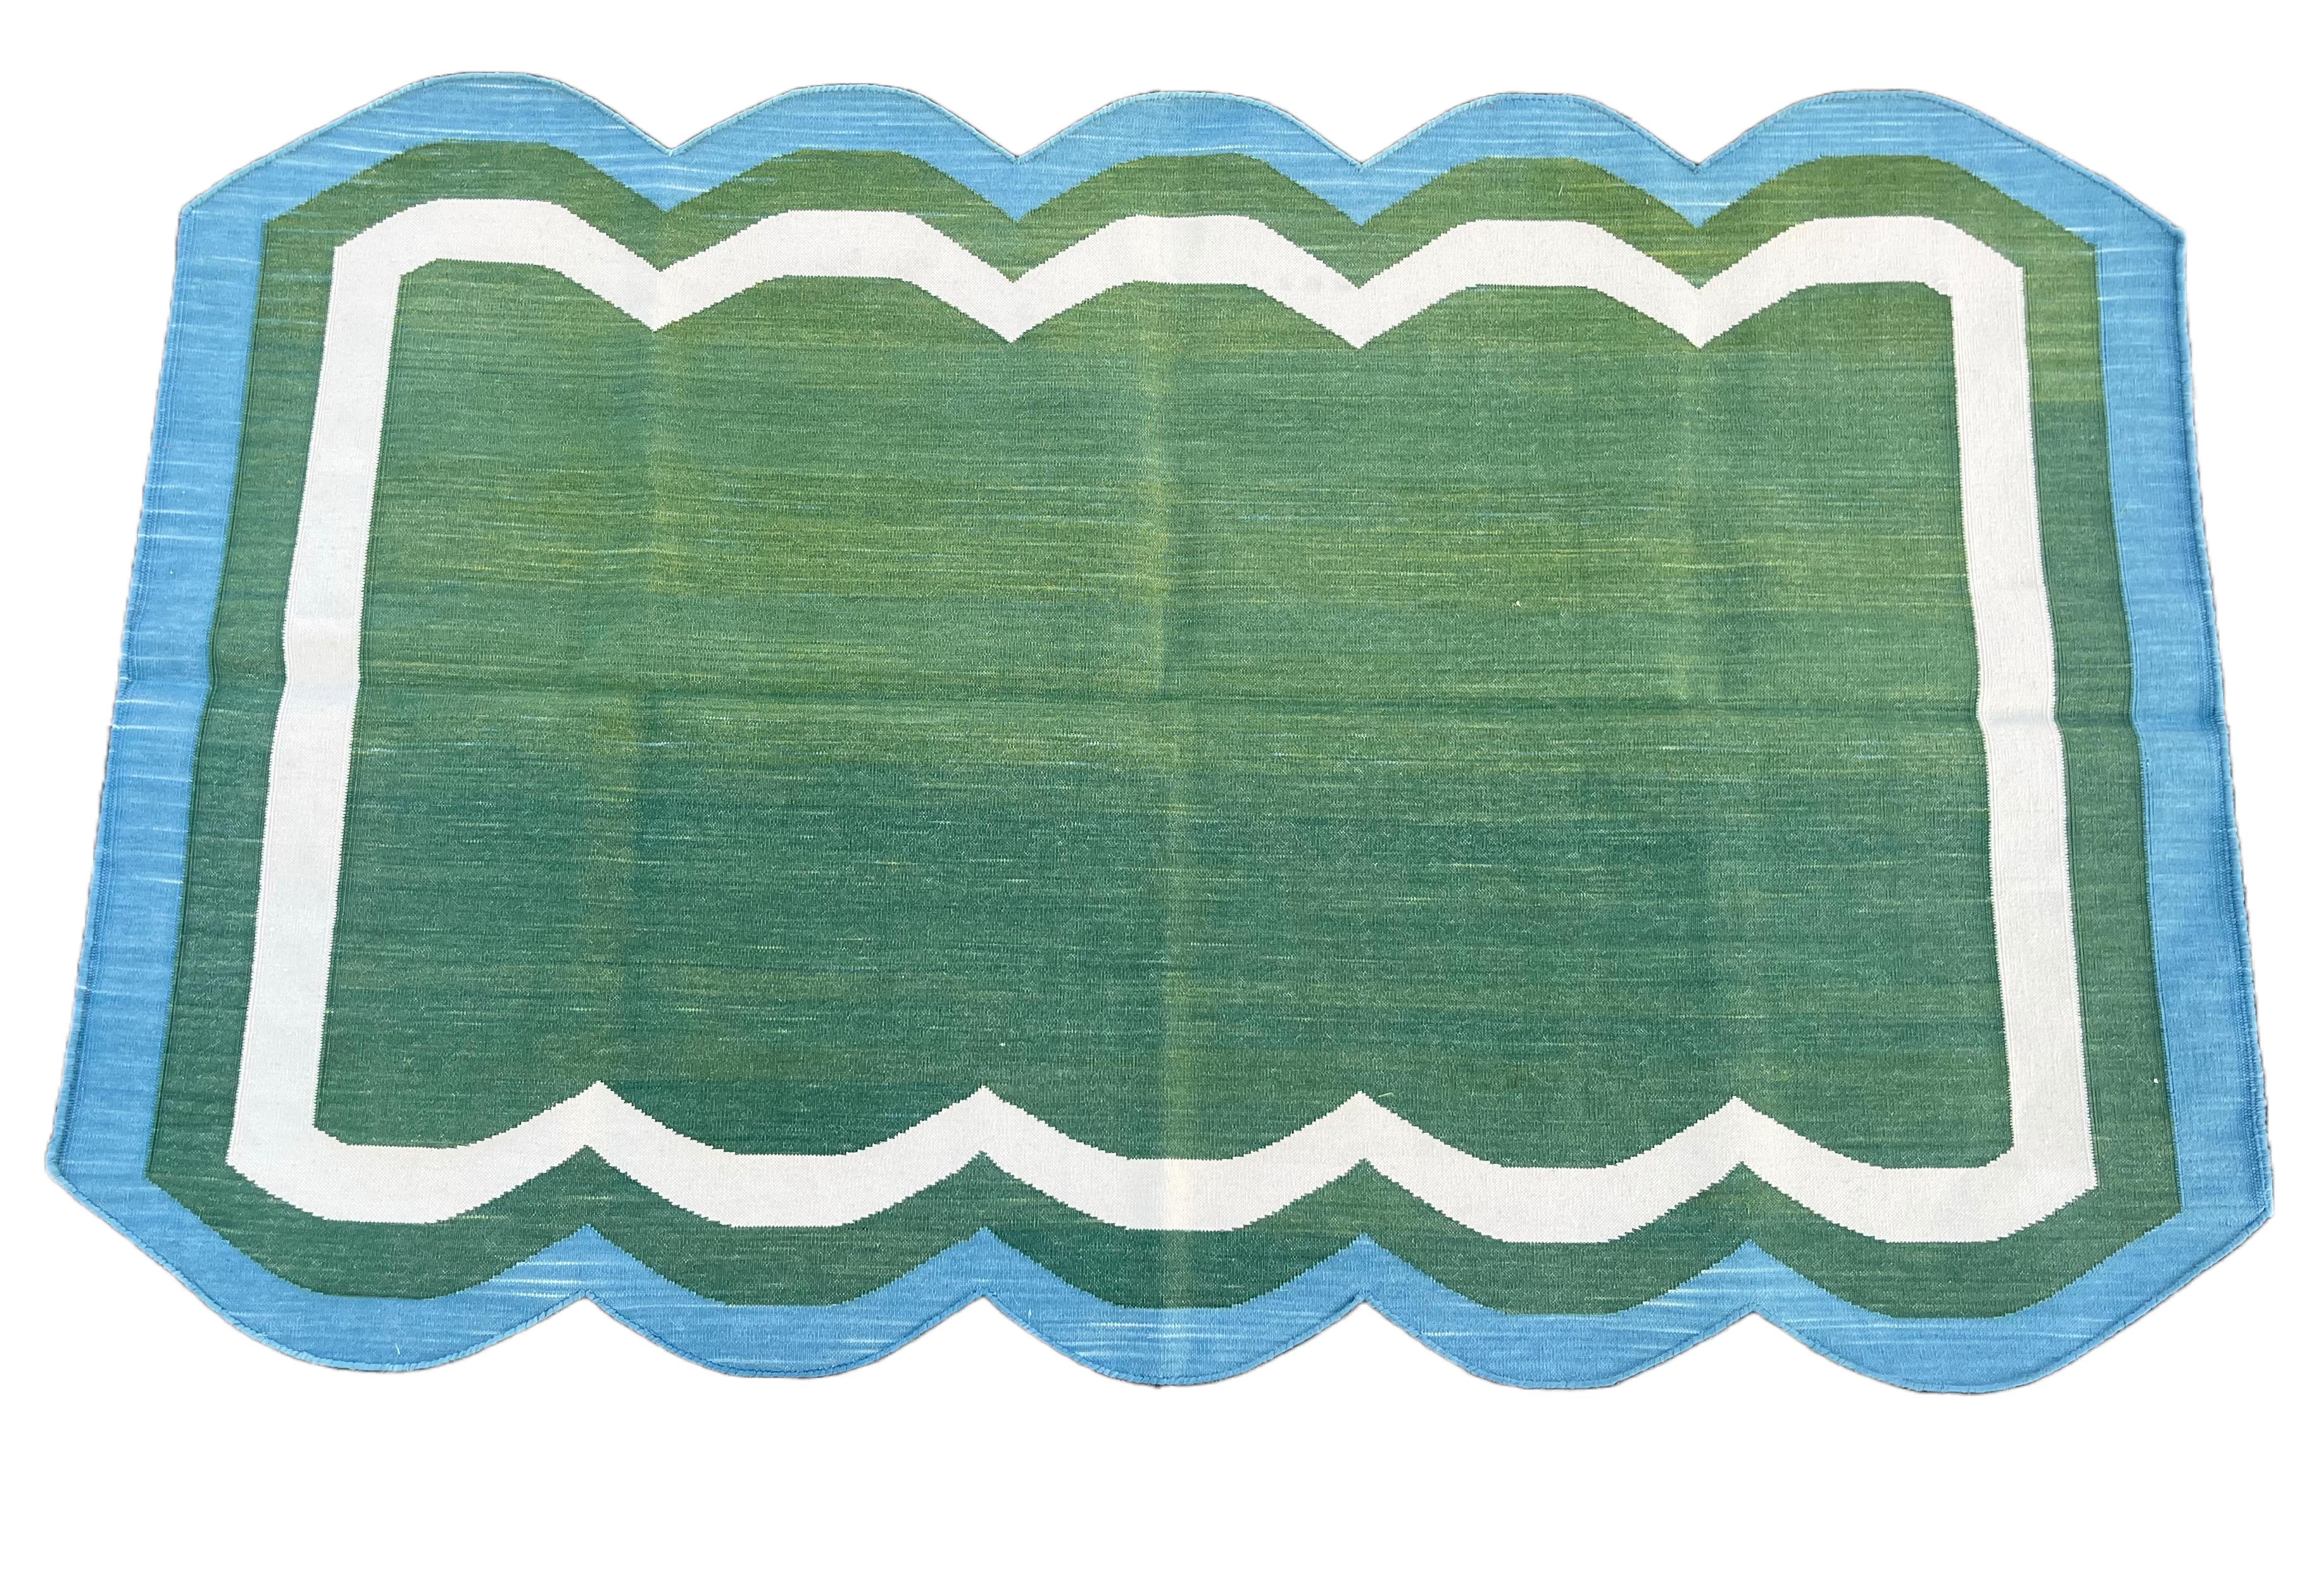 Cotton Vegetable Dyed Forest Green, Cream And Teal Blue Two Sided Scalloped Rug-3'x5' 
(Scallops runs on all 5 Feet Sides)
These special flat-weave dhurries are hand-woven with 15 ply 100% cotton yarn. Due to the special manufacturing techniques